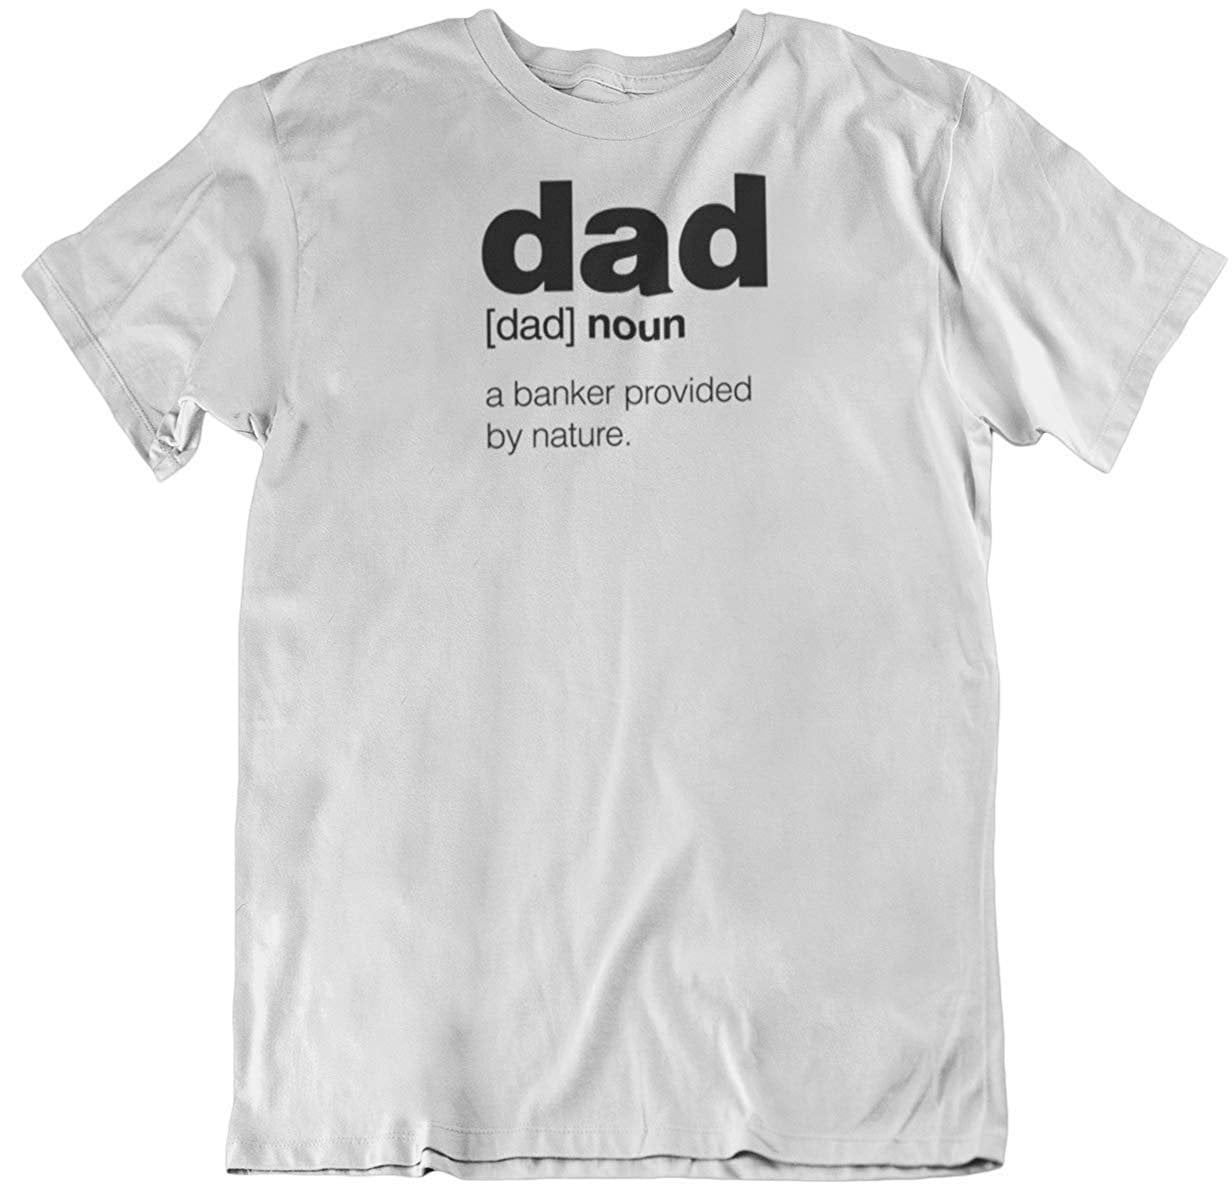 Dad. A Banker Provided by Nature. Statement T-Shirt for Father, Daddy and Men - Walmart.com